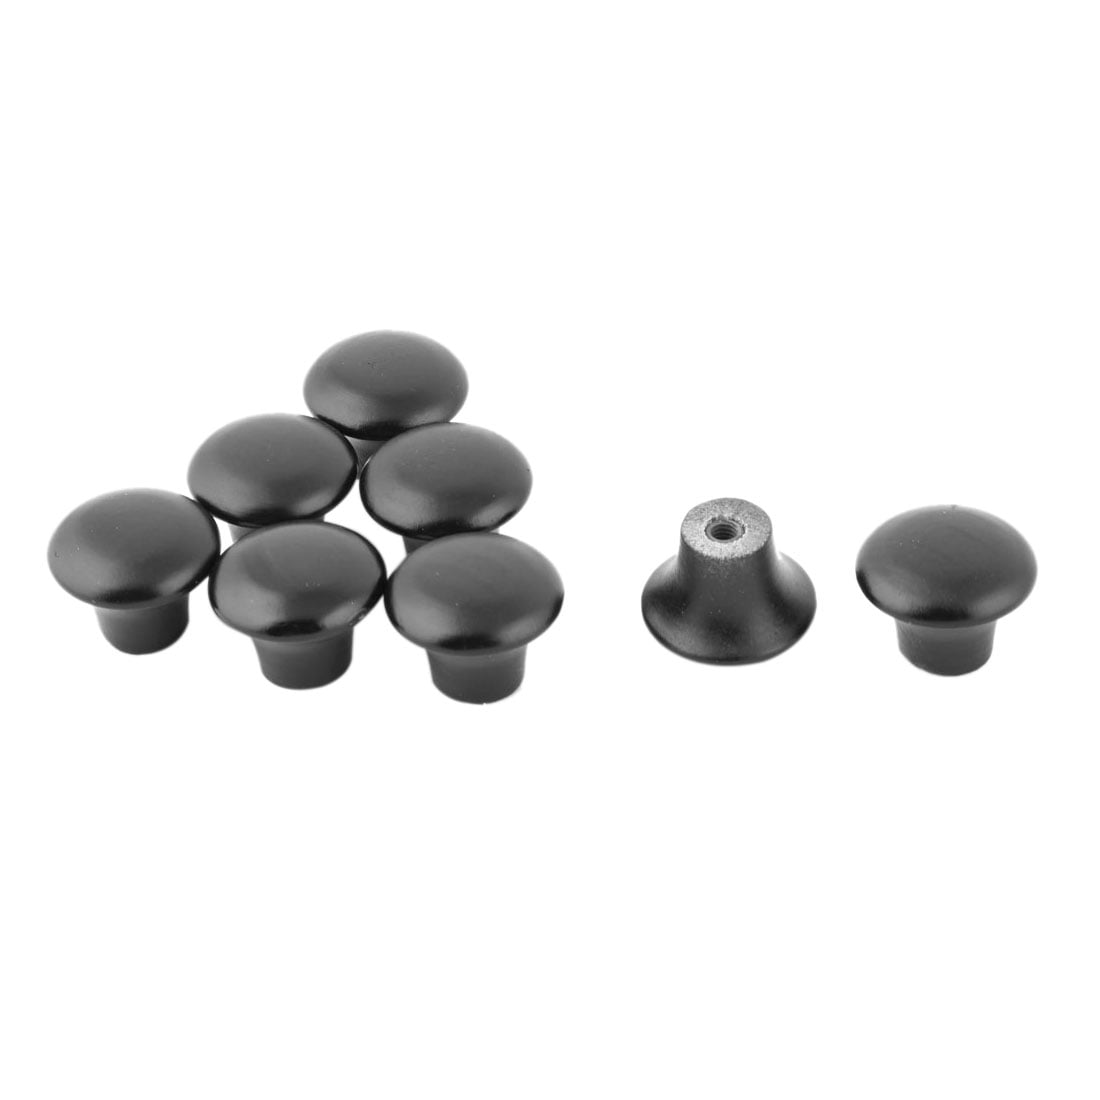 23mm Diameter Drawer Cupboard Cabinet Round Pull Knobs Handle 8 Pcs